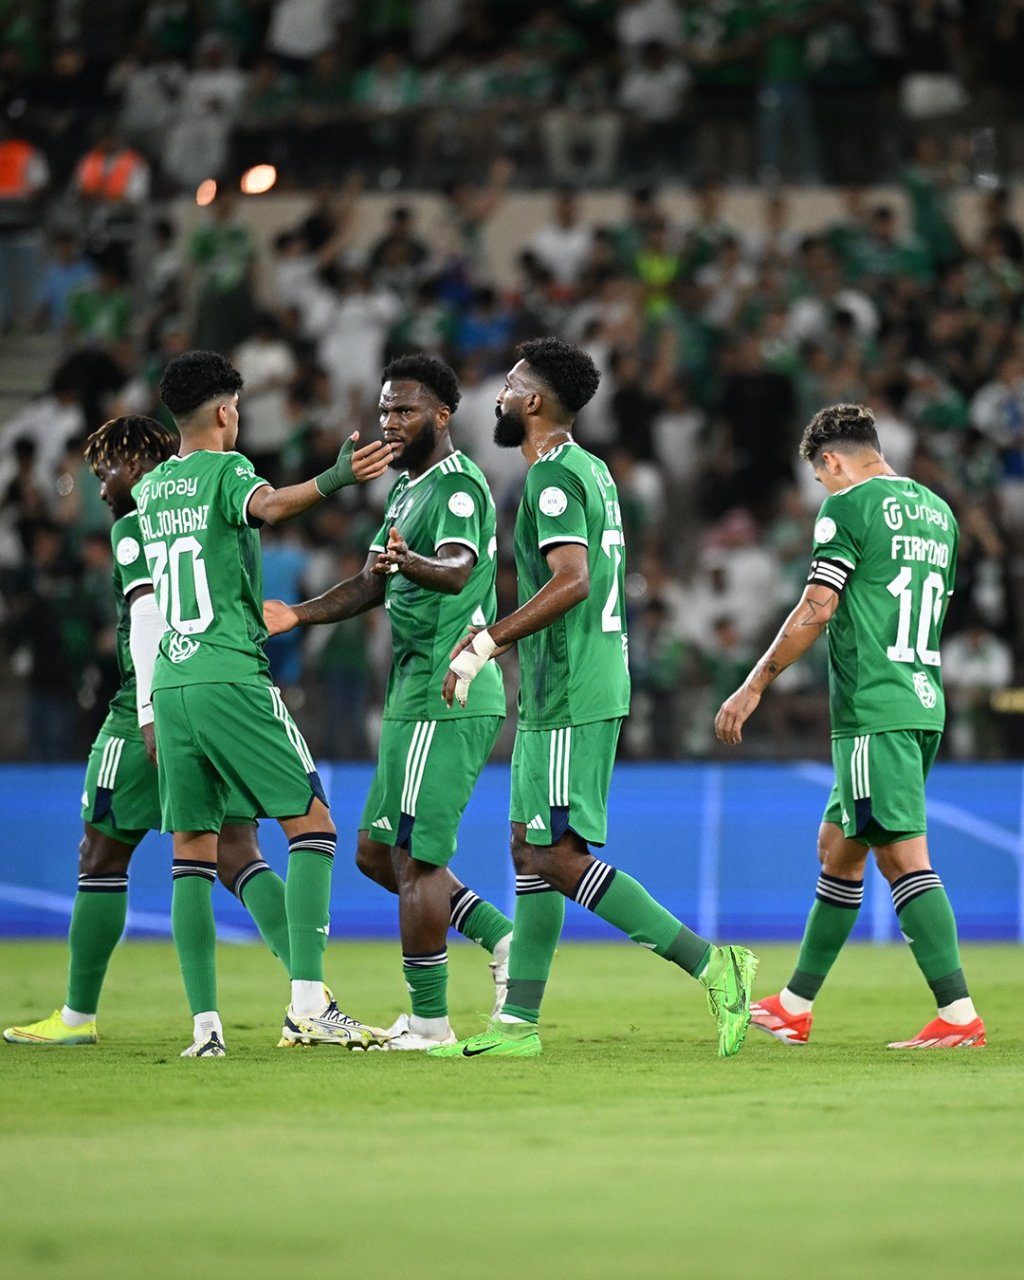 Al-Ahli told £20M is enough to sign Ligue 1 goalscorer amid competition with Man United, Chelsea & 2 other Premier League clubs